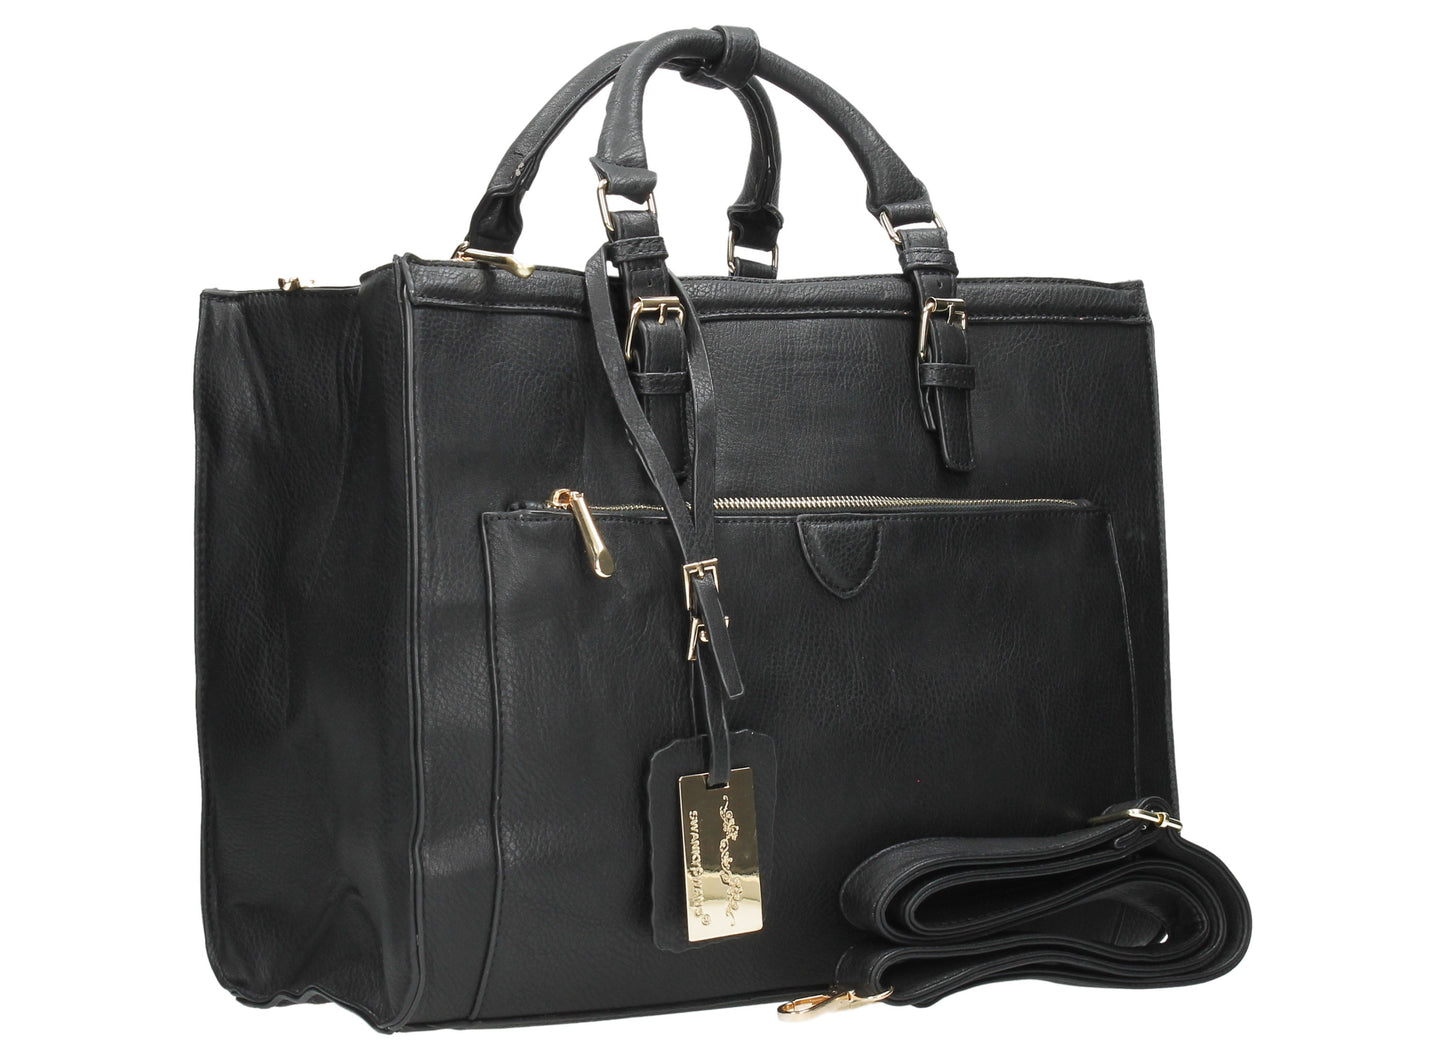 Swanky Swans Marcella Cosmo Handbag BlackPerfect for School, Weddings, Day out!